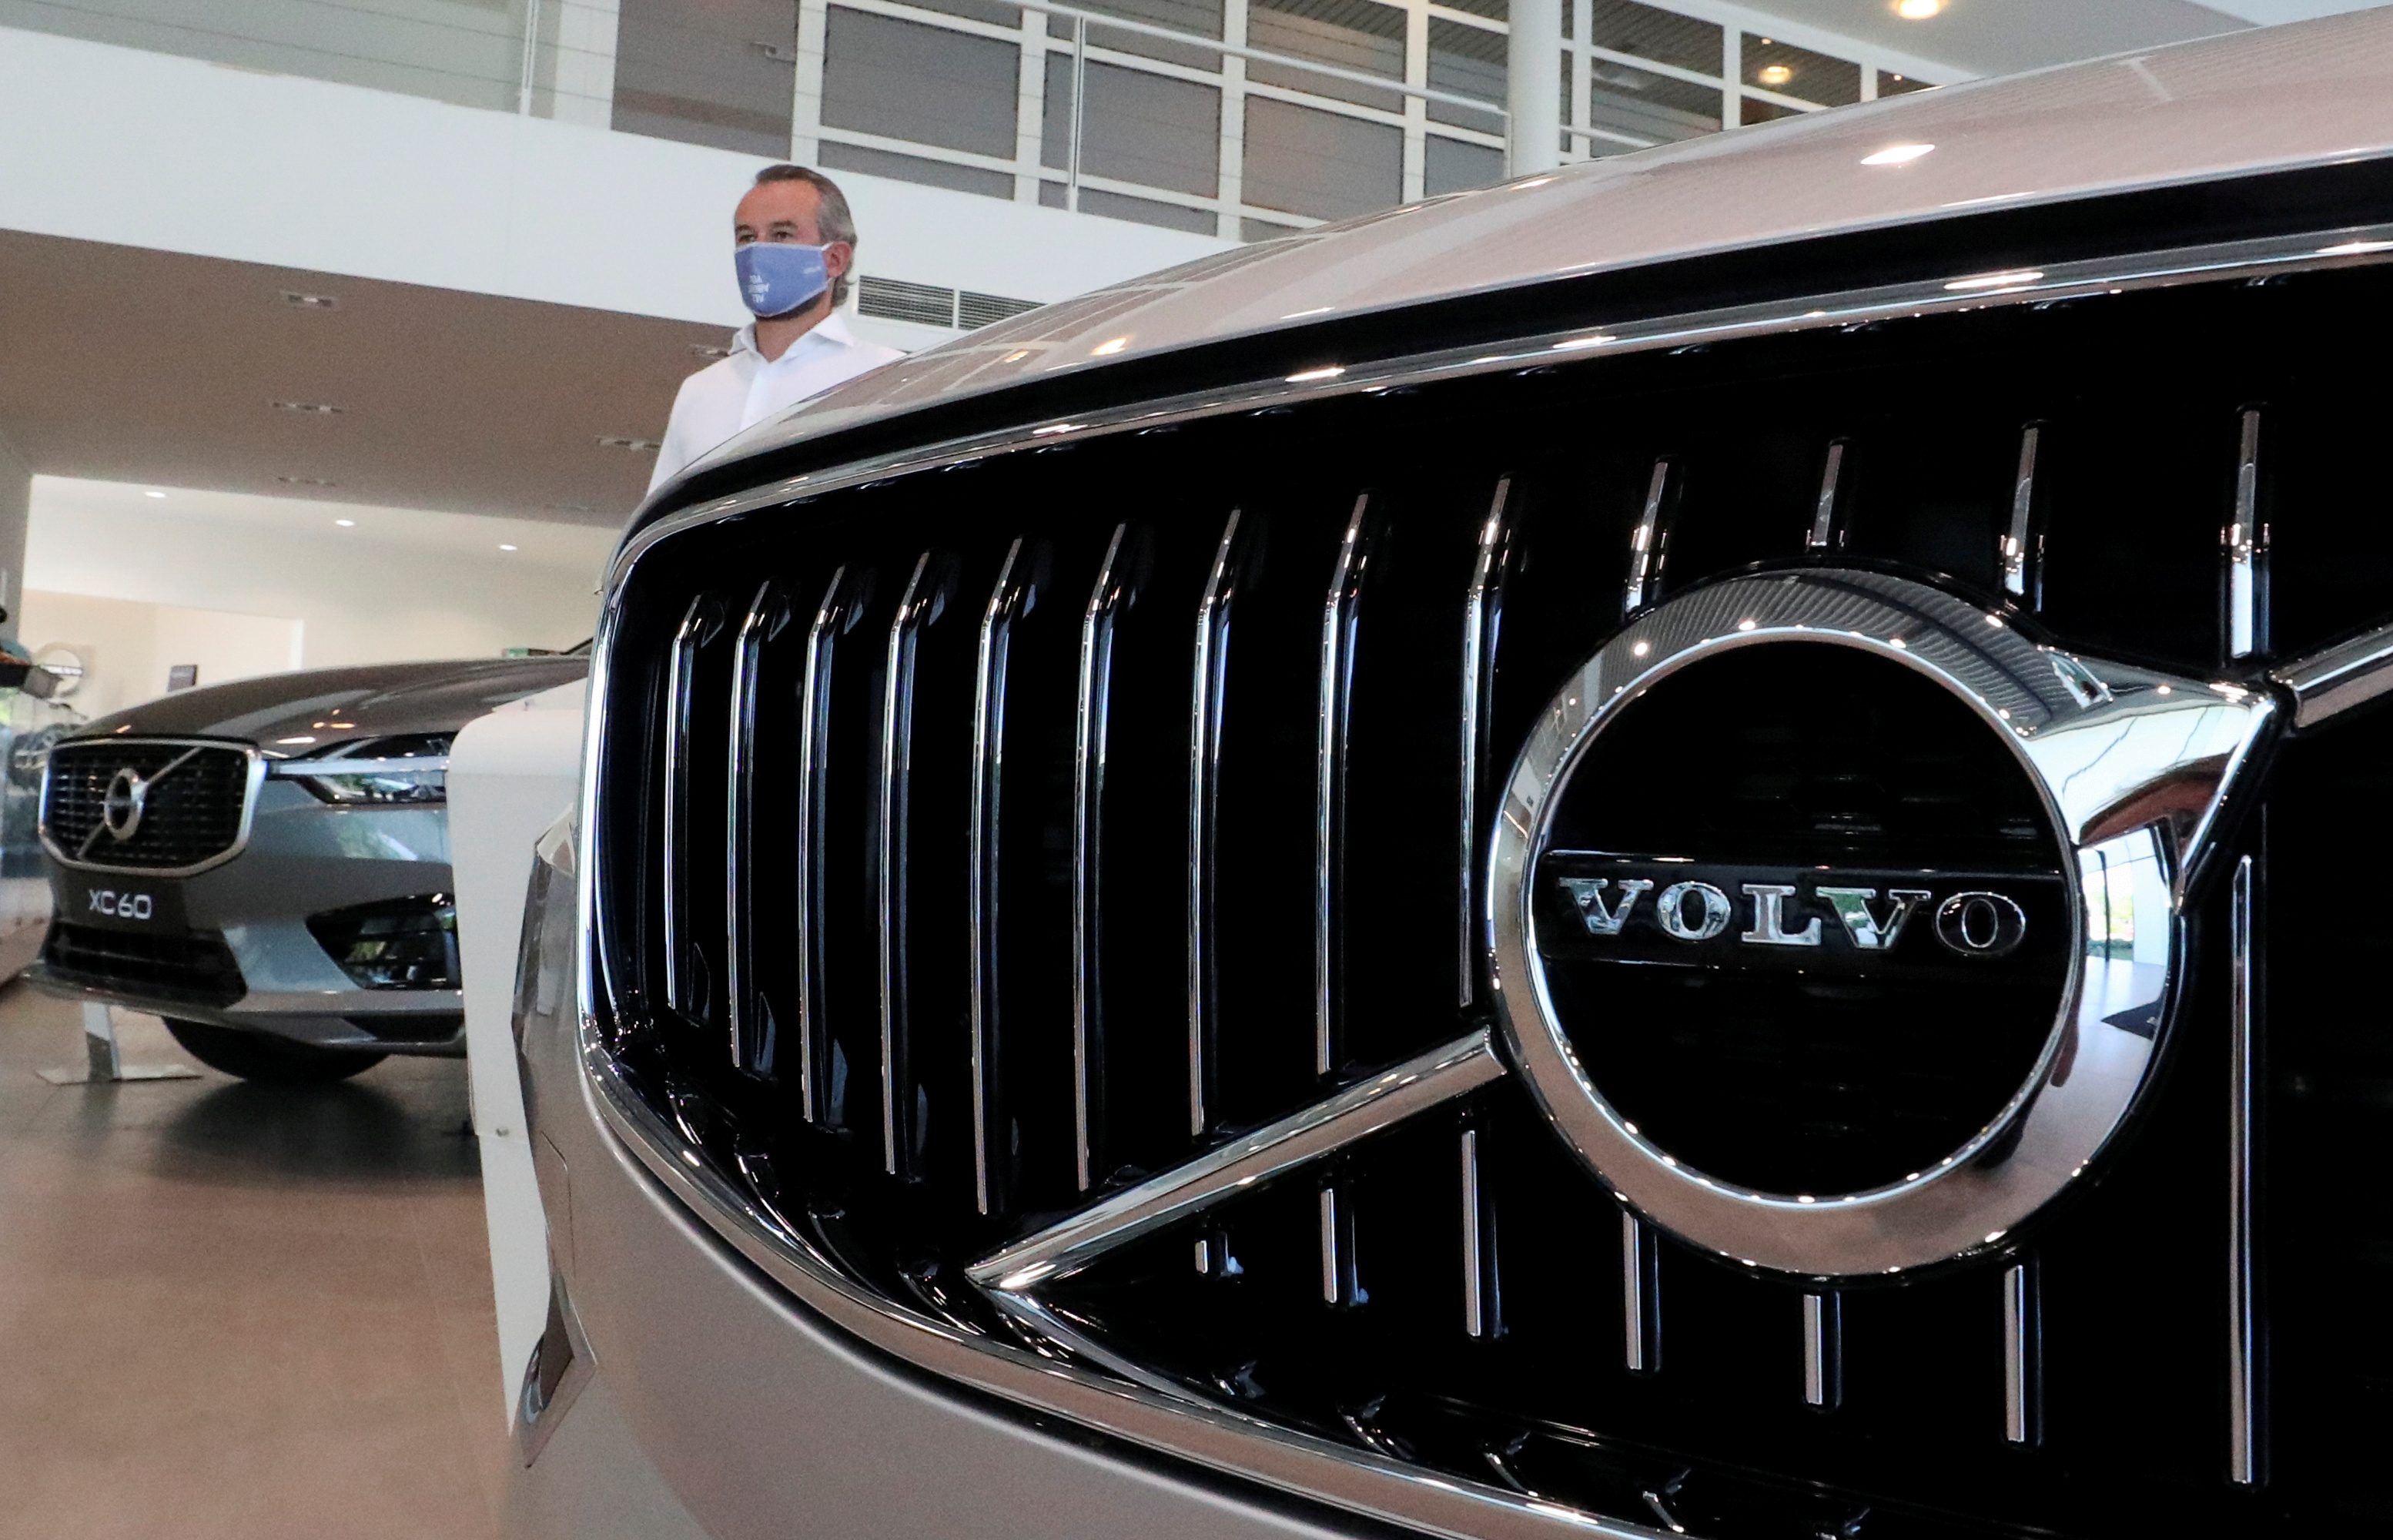 Volvo offers employees 24 weeks of paid parental leave